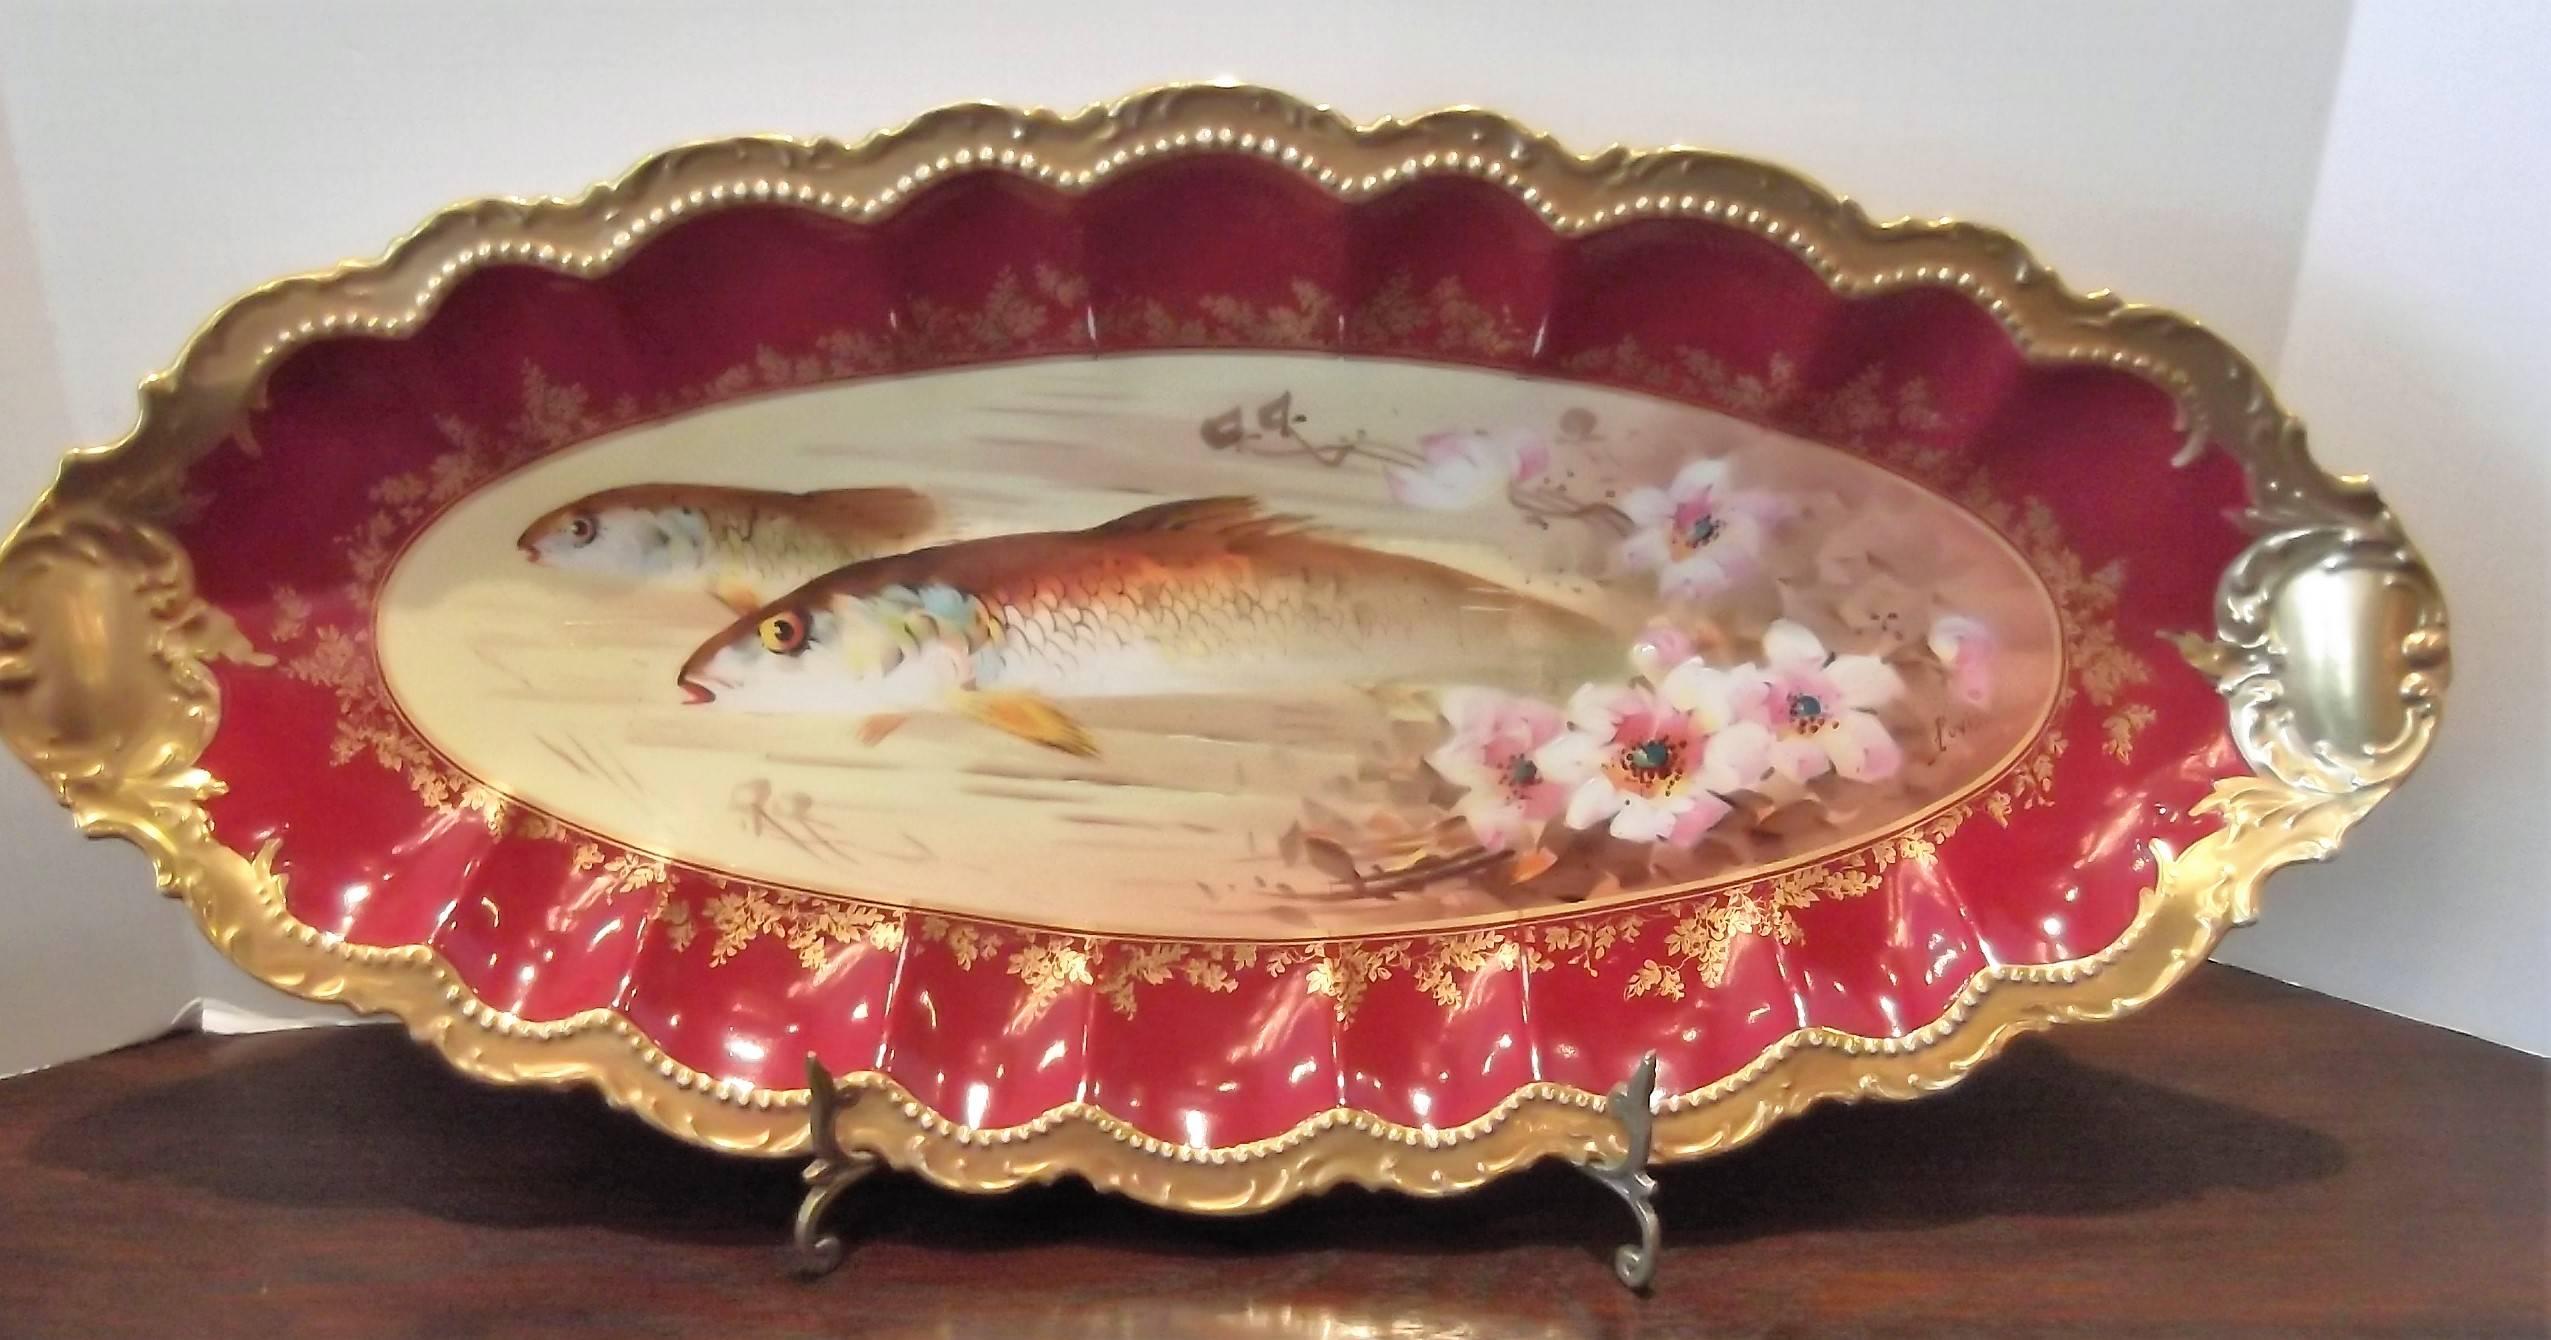 A set of 12 plates and one large fish platter, hand-painted with rich gilt border. The deep raspberry borders have a gilt leafy overlay. Measures: The plates are 9.5" diameter, the platter measures 11.25" high, 24.25" wide. The